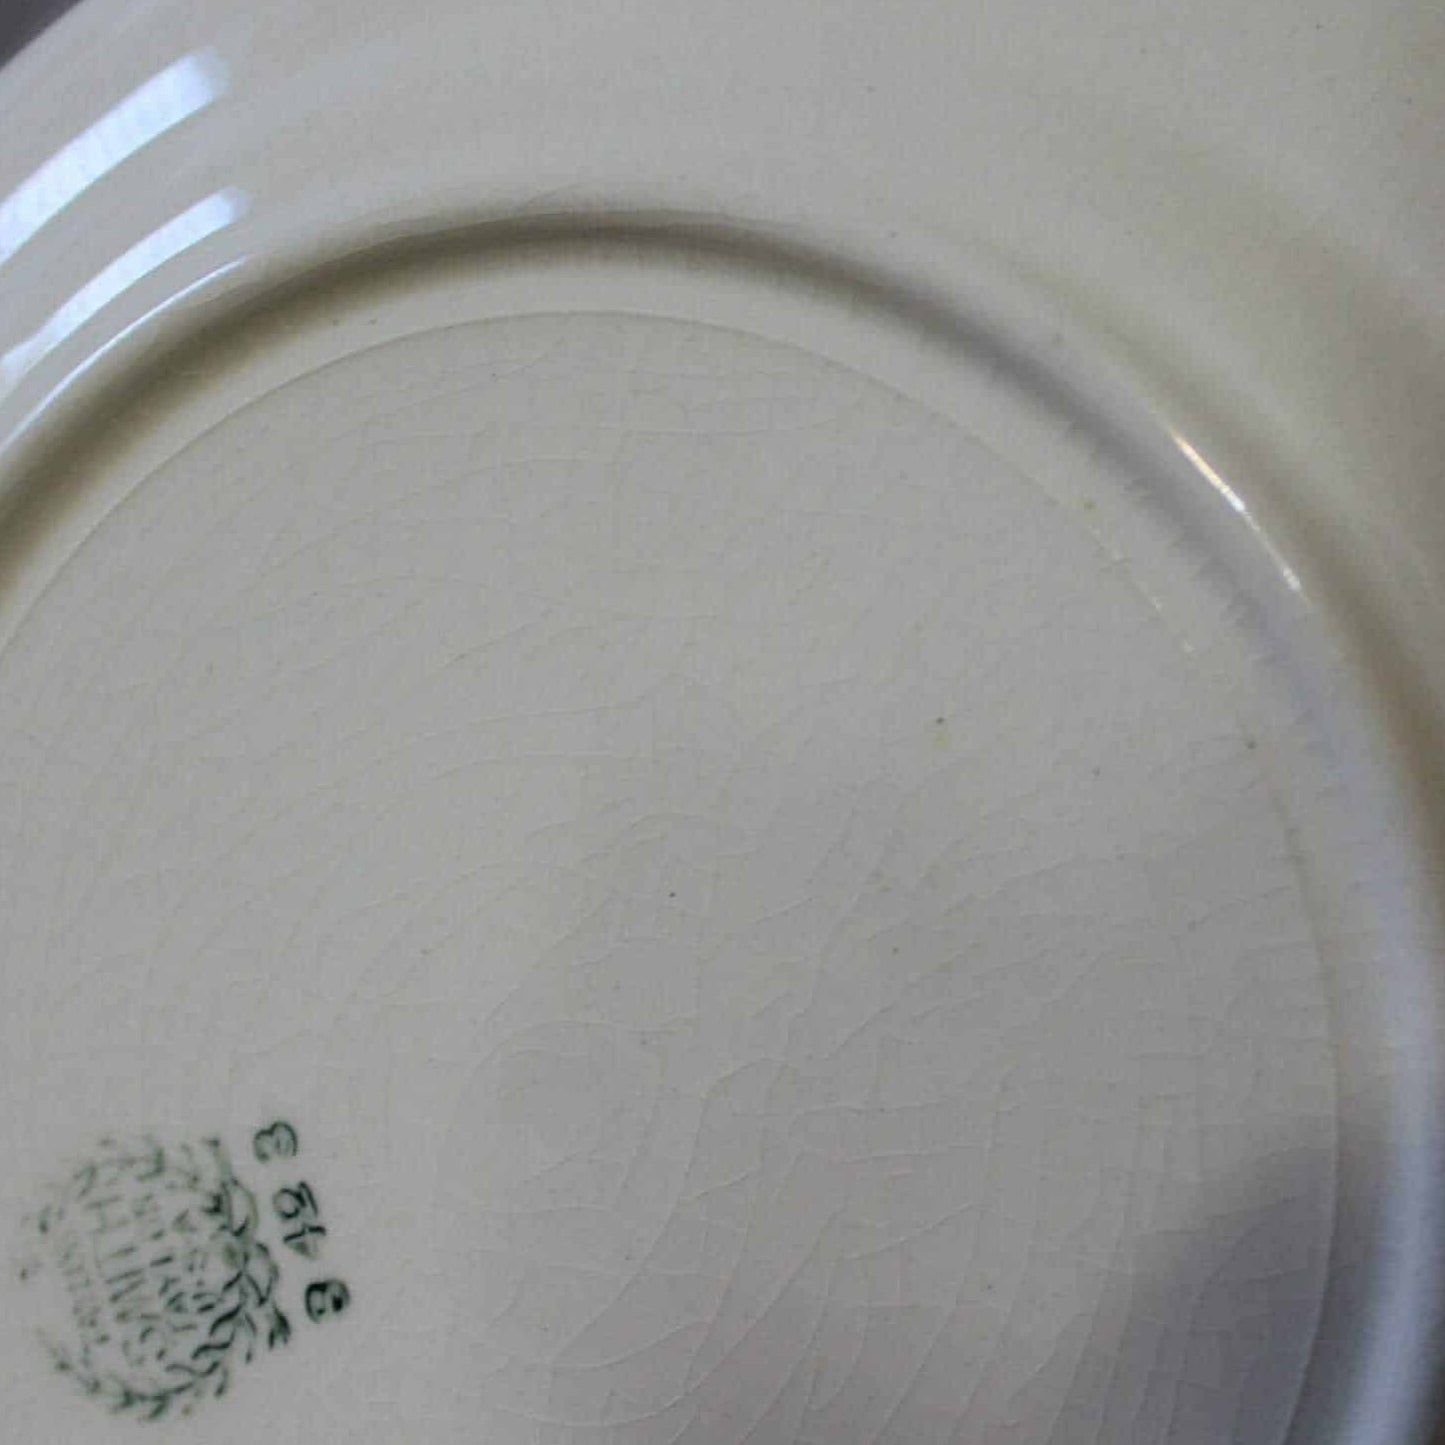 Bread & Butter Plates, Taylor Smith & Taylor, 1797, Set of 6, Vintage